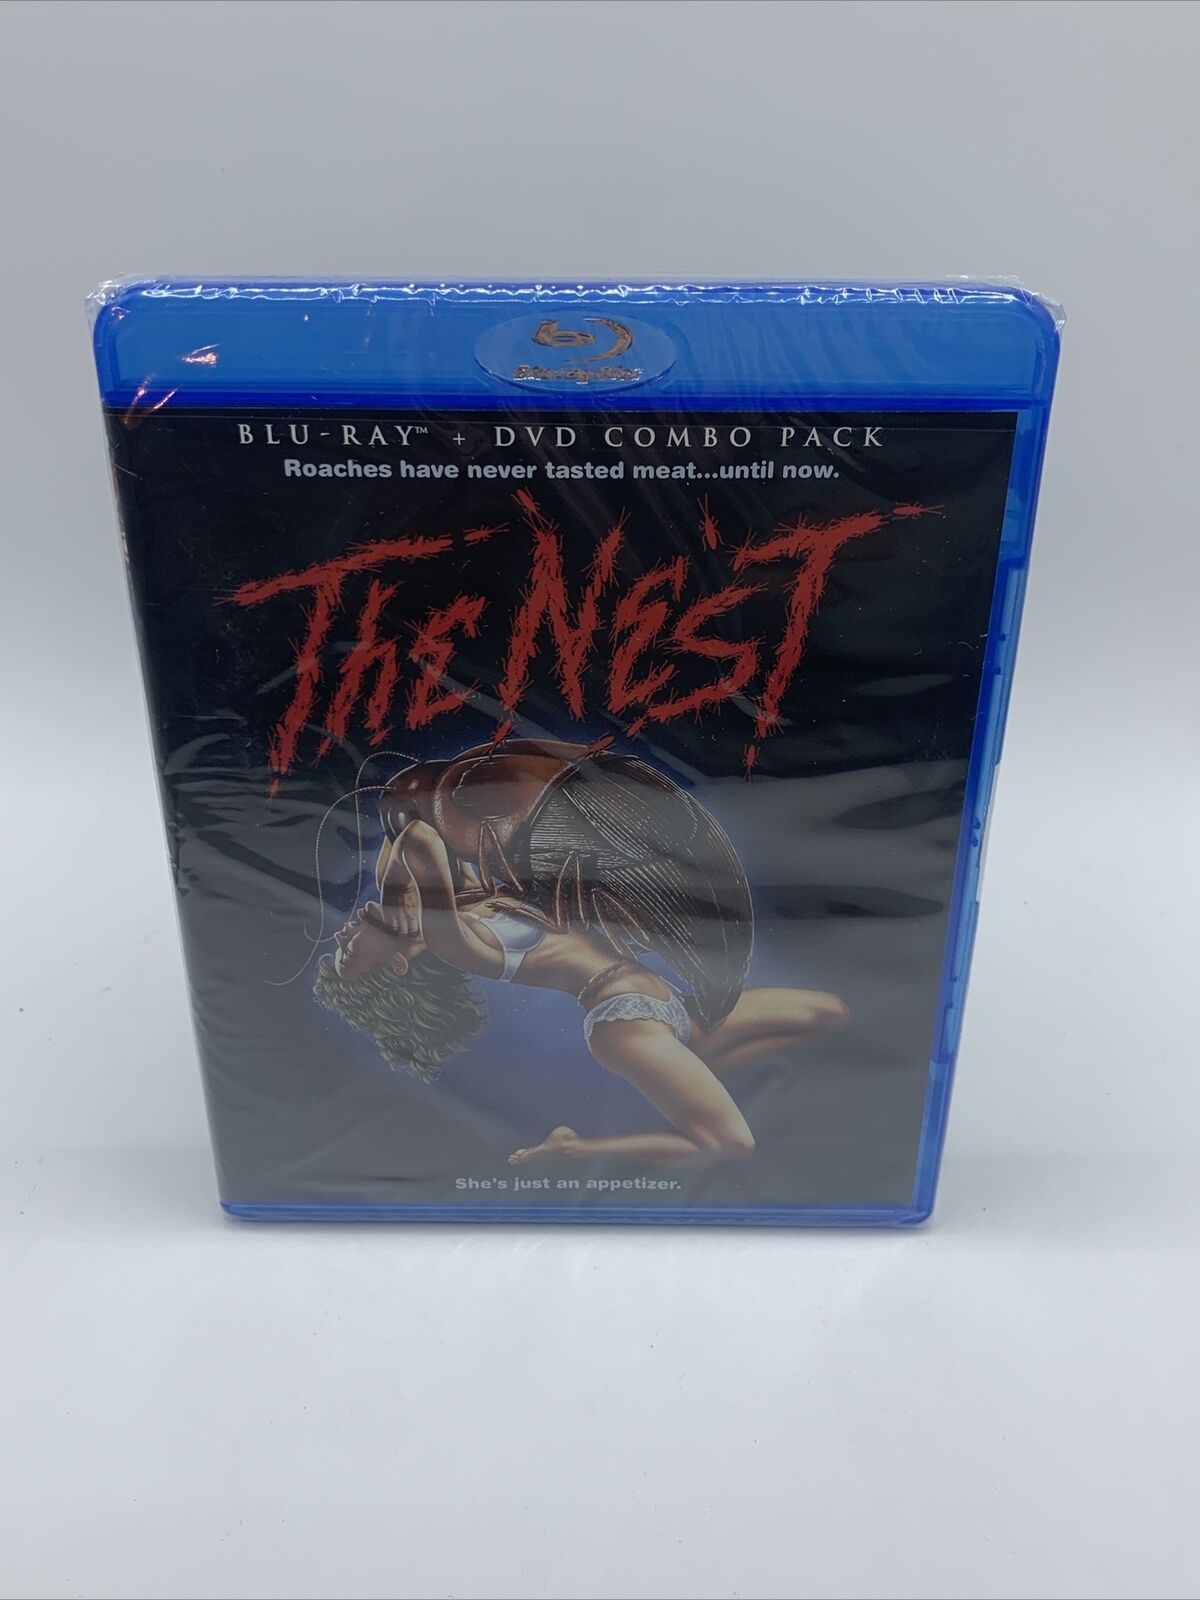 THE NEST New Sealed Blu-ray + DVD Combo Pack *FACTORY SEALED* New